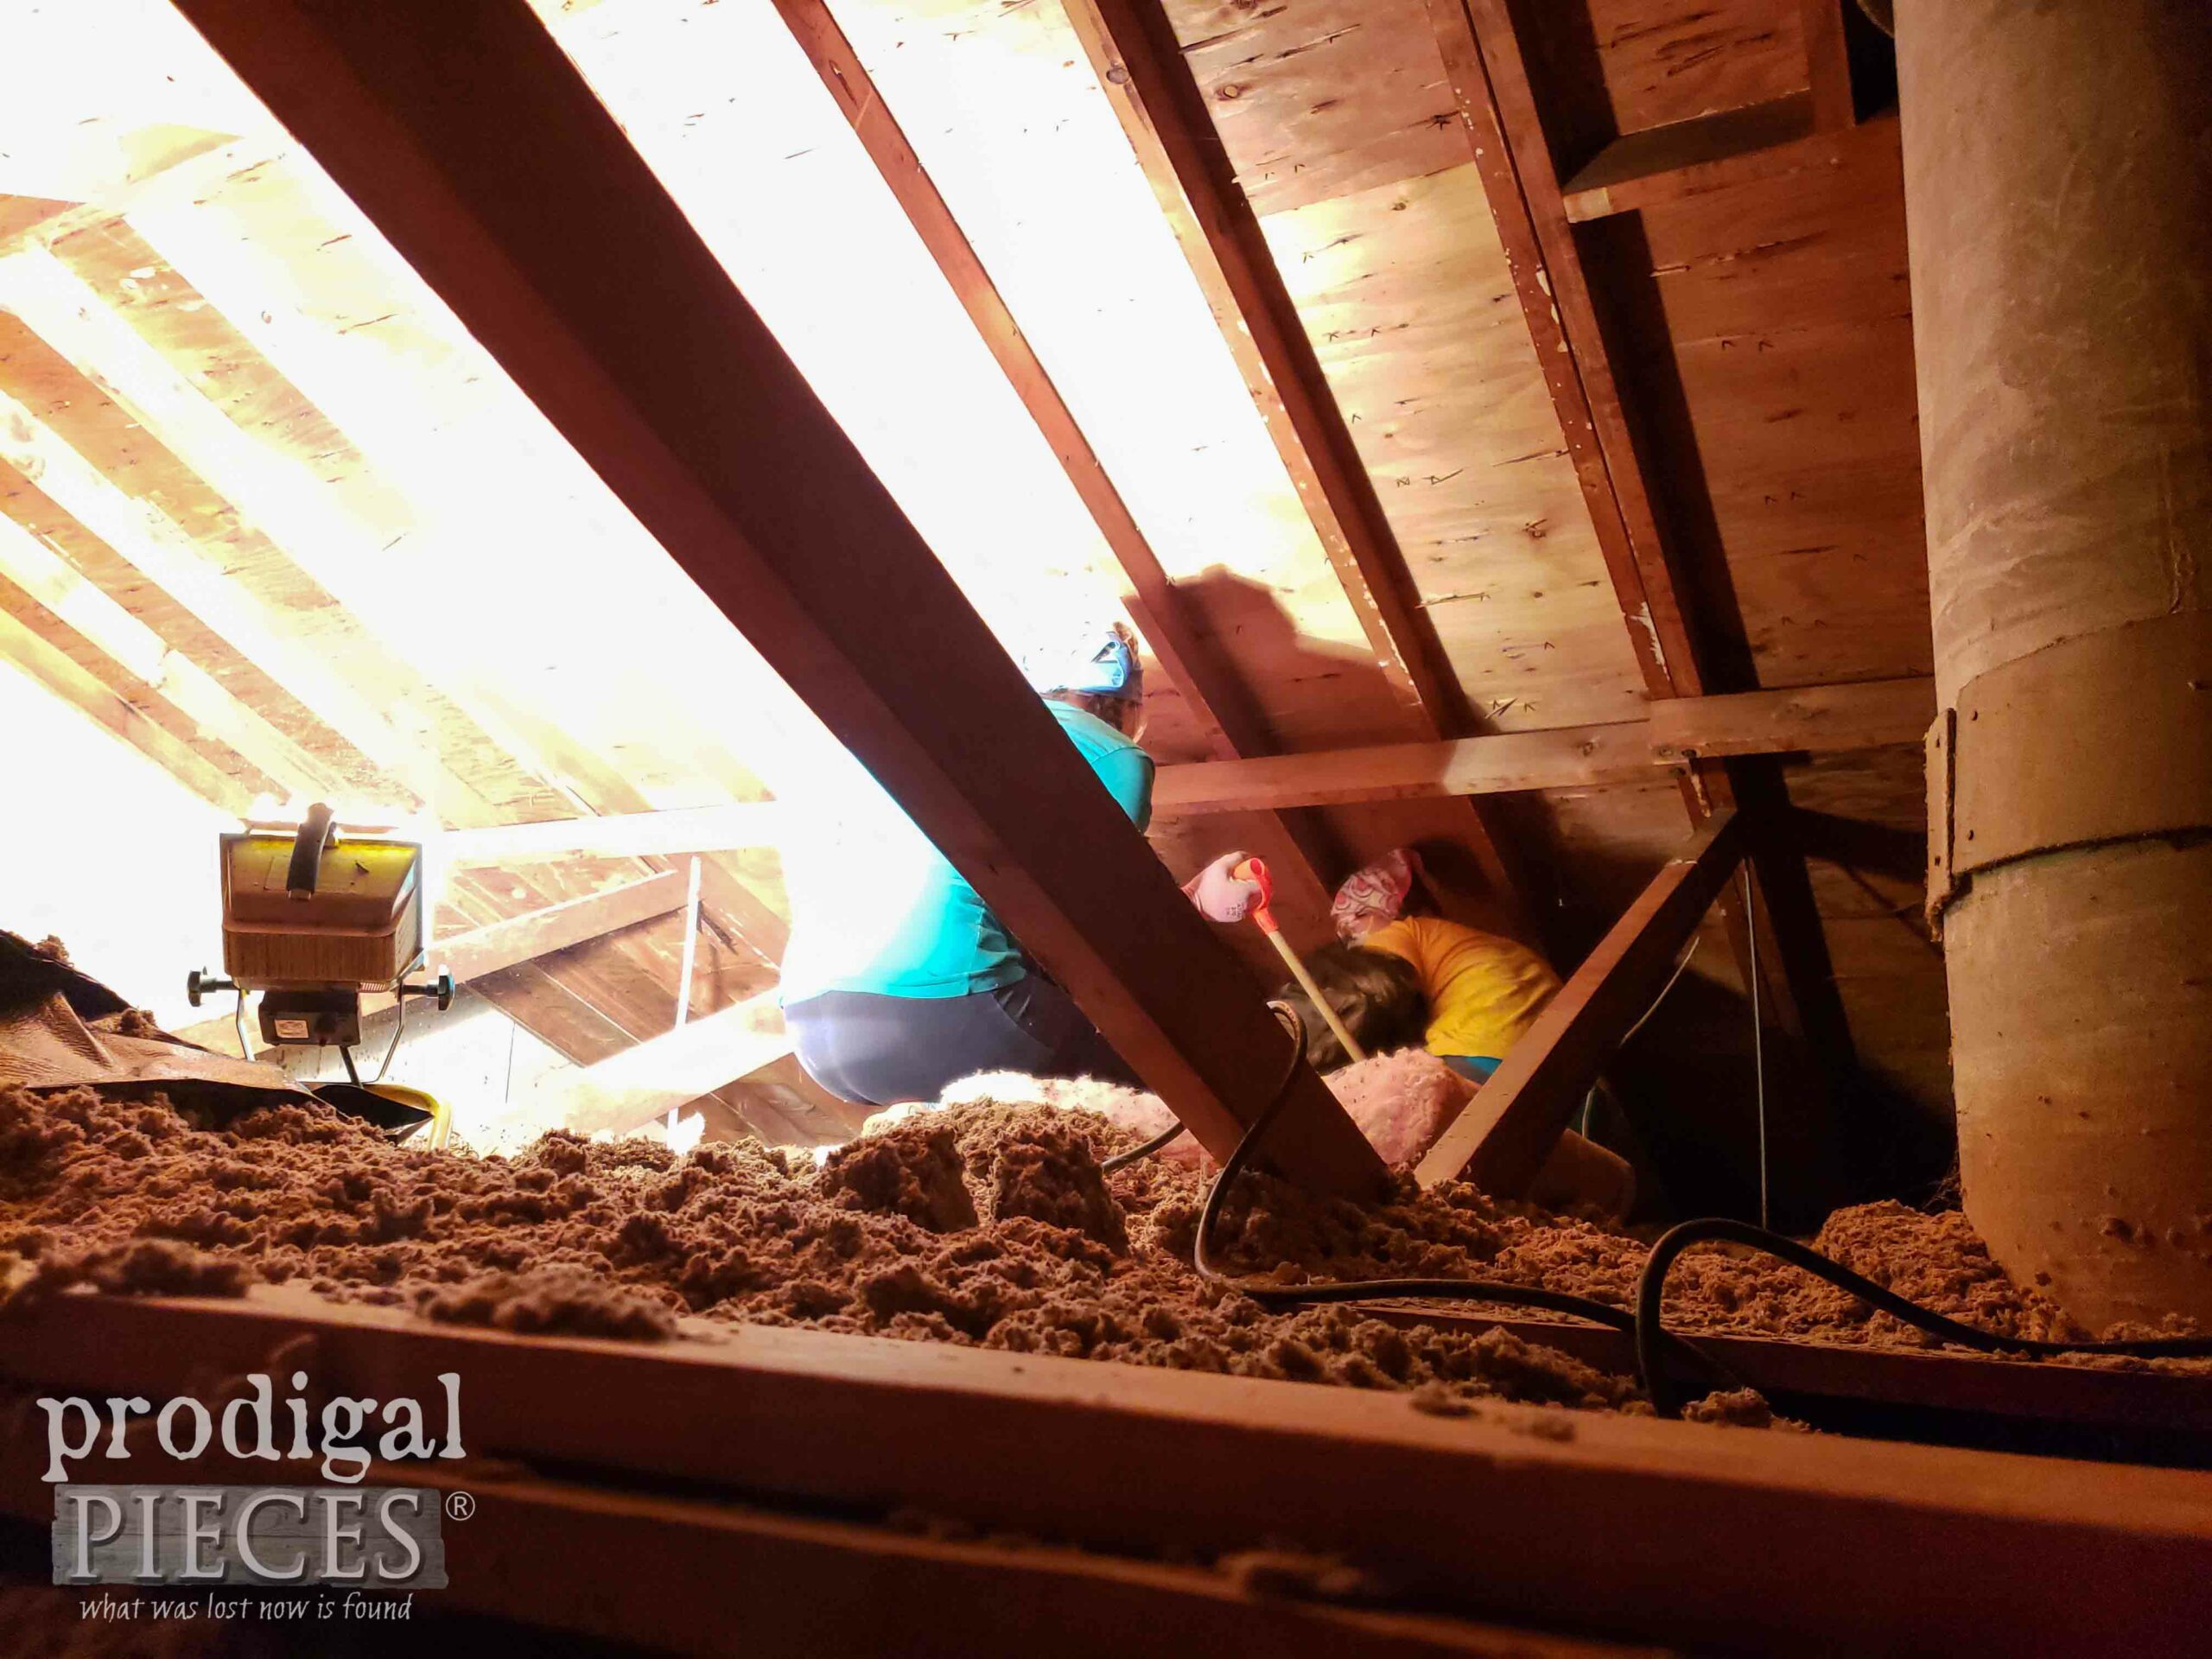 Removing Blown Insulation in Living Room Remodel | prodigalpieces.com #prodigalpieces